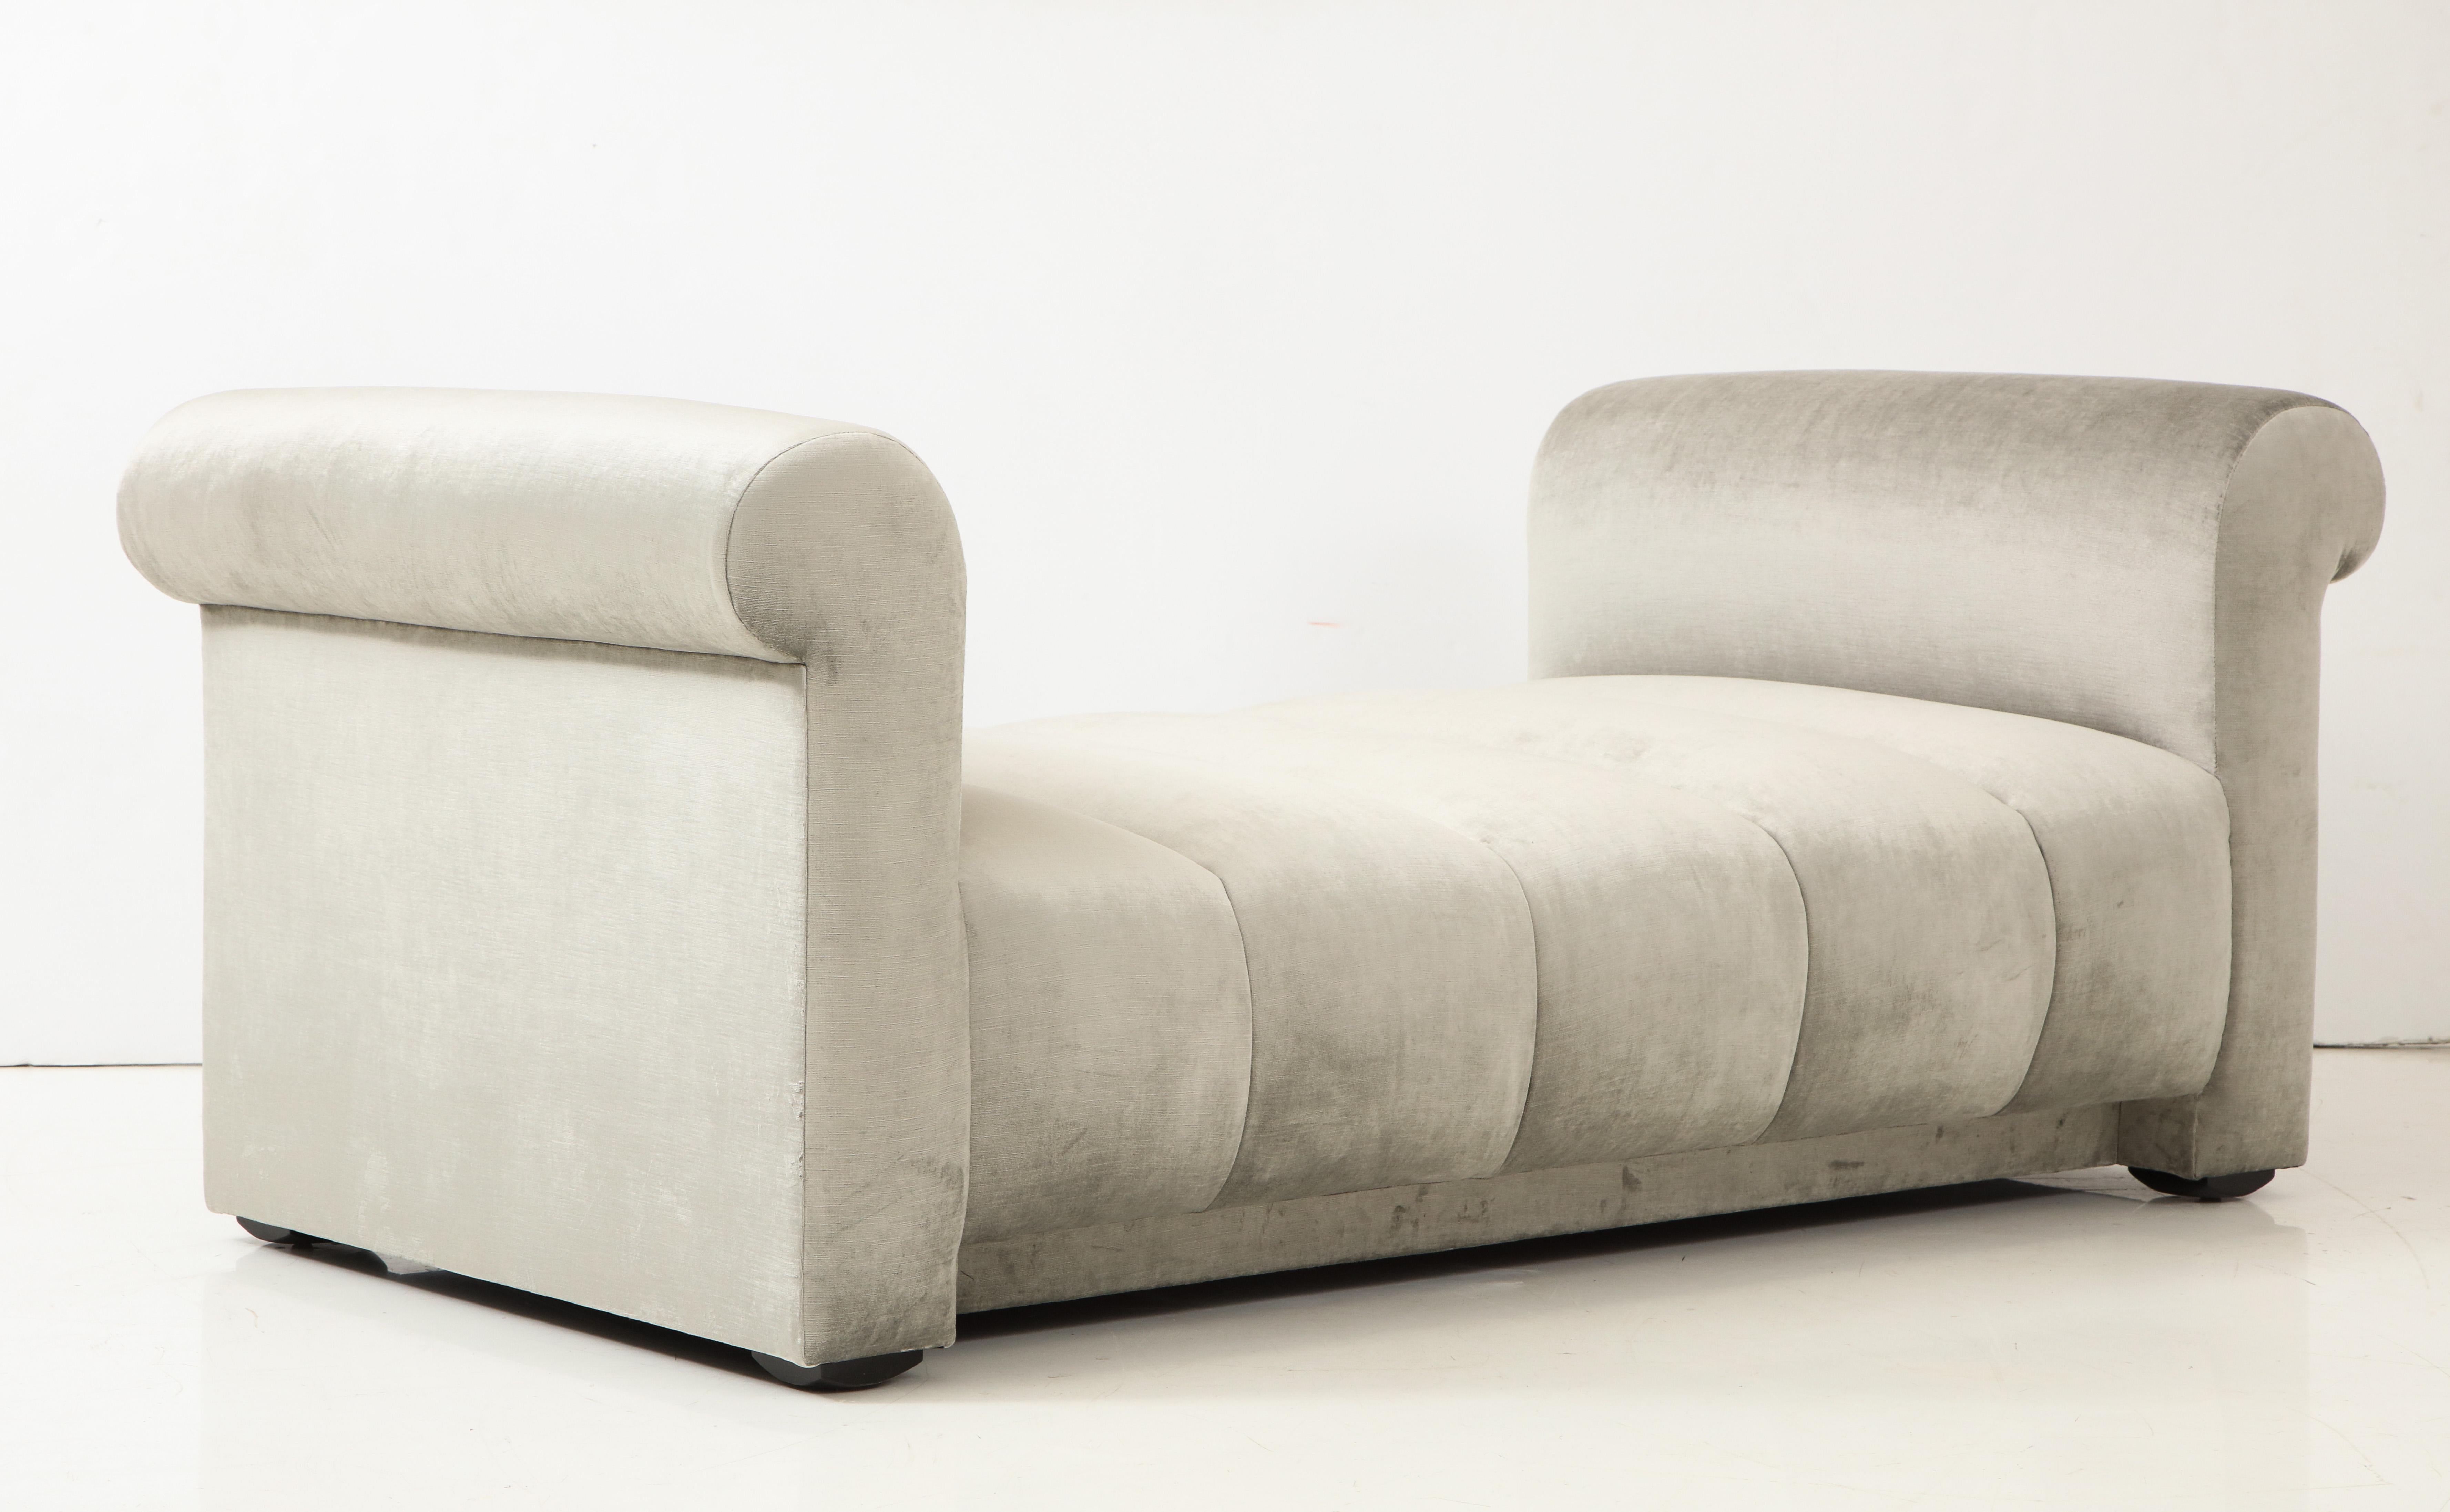 Custom Designed Chaise Lounge by Steve Chase (Moderne)